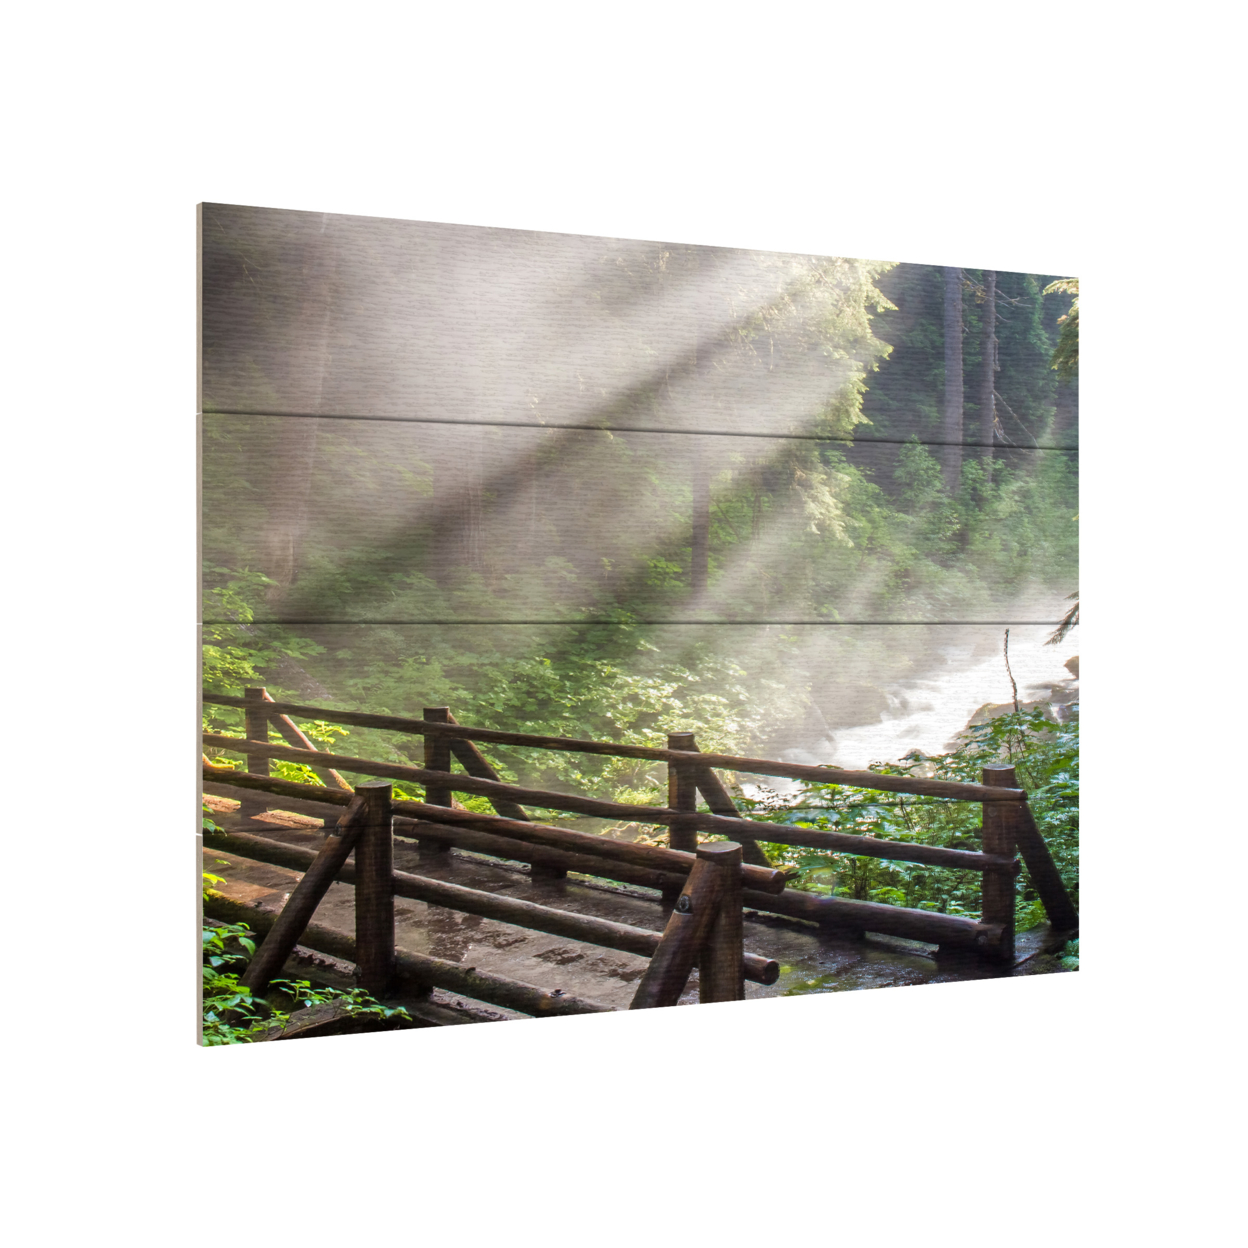 Wall Art 12 X 16 Inches Titled Forest Sunlight Ready To Hang Printed On Wooden Planks